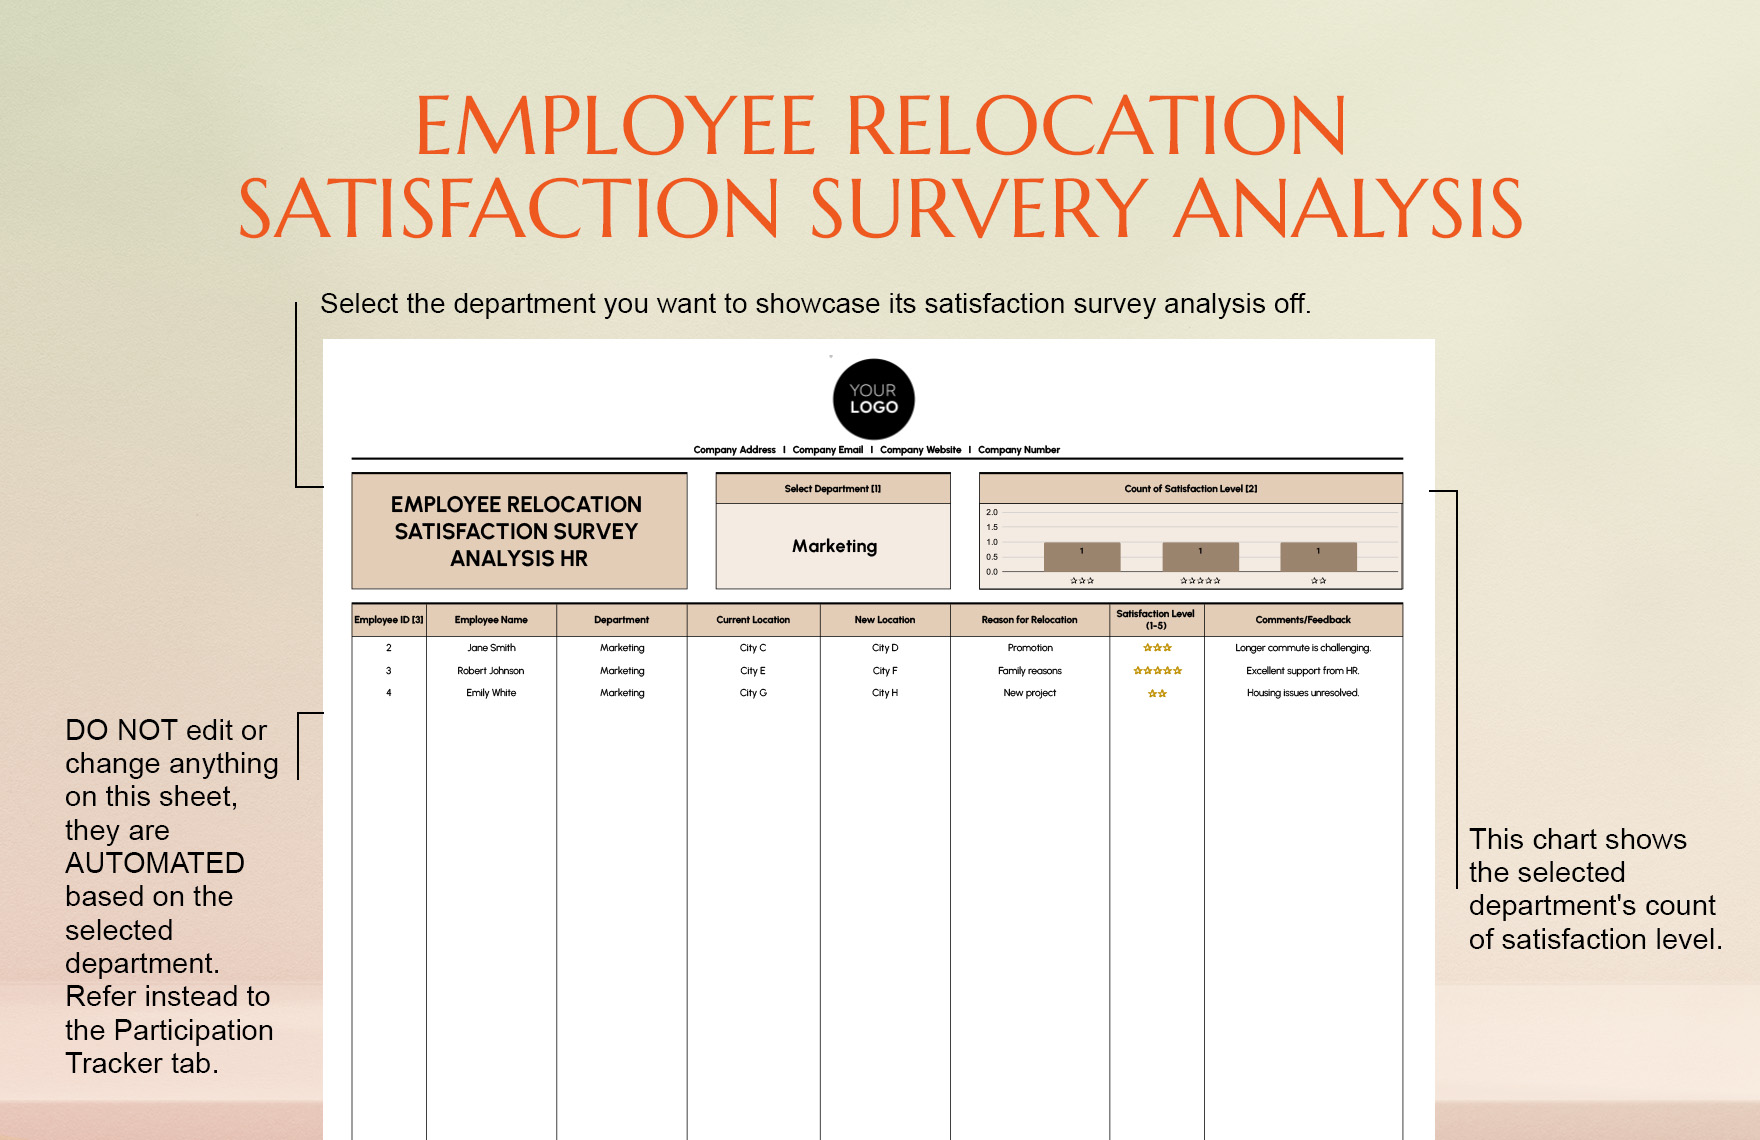 Employee Relocation Satisfaction Survey Analysis HR Template